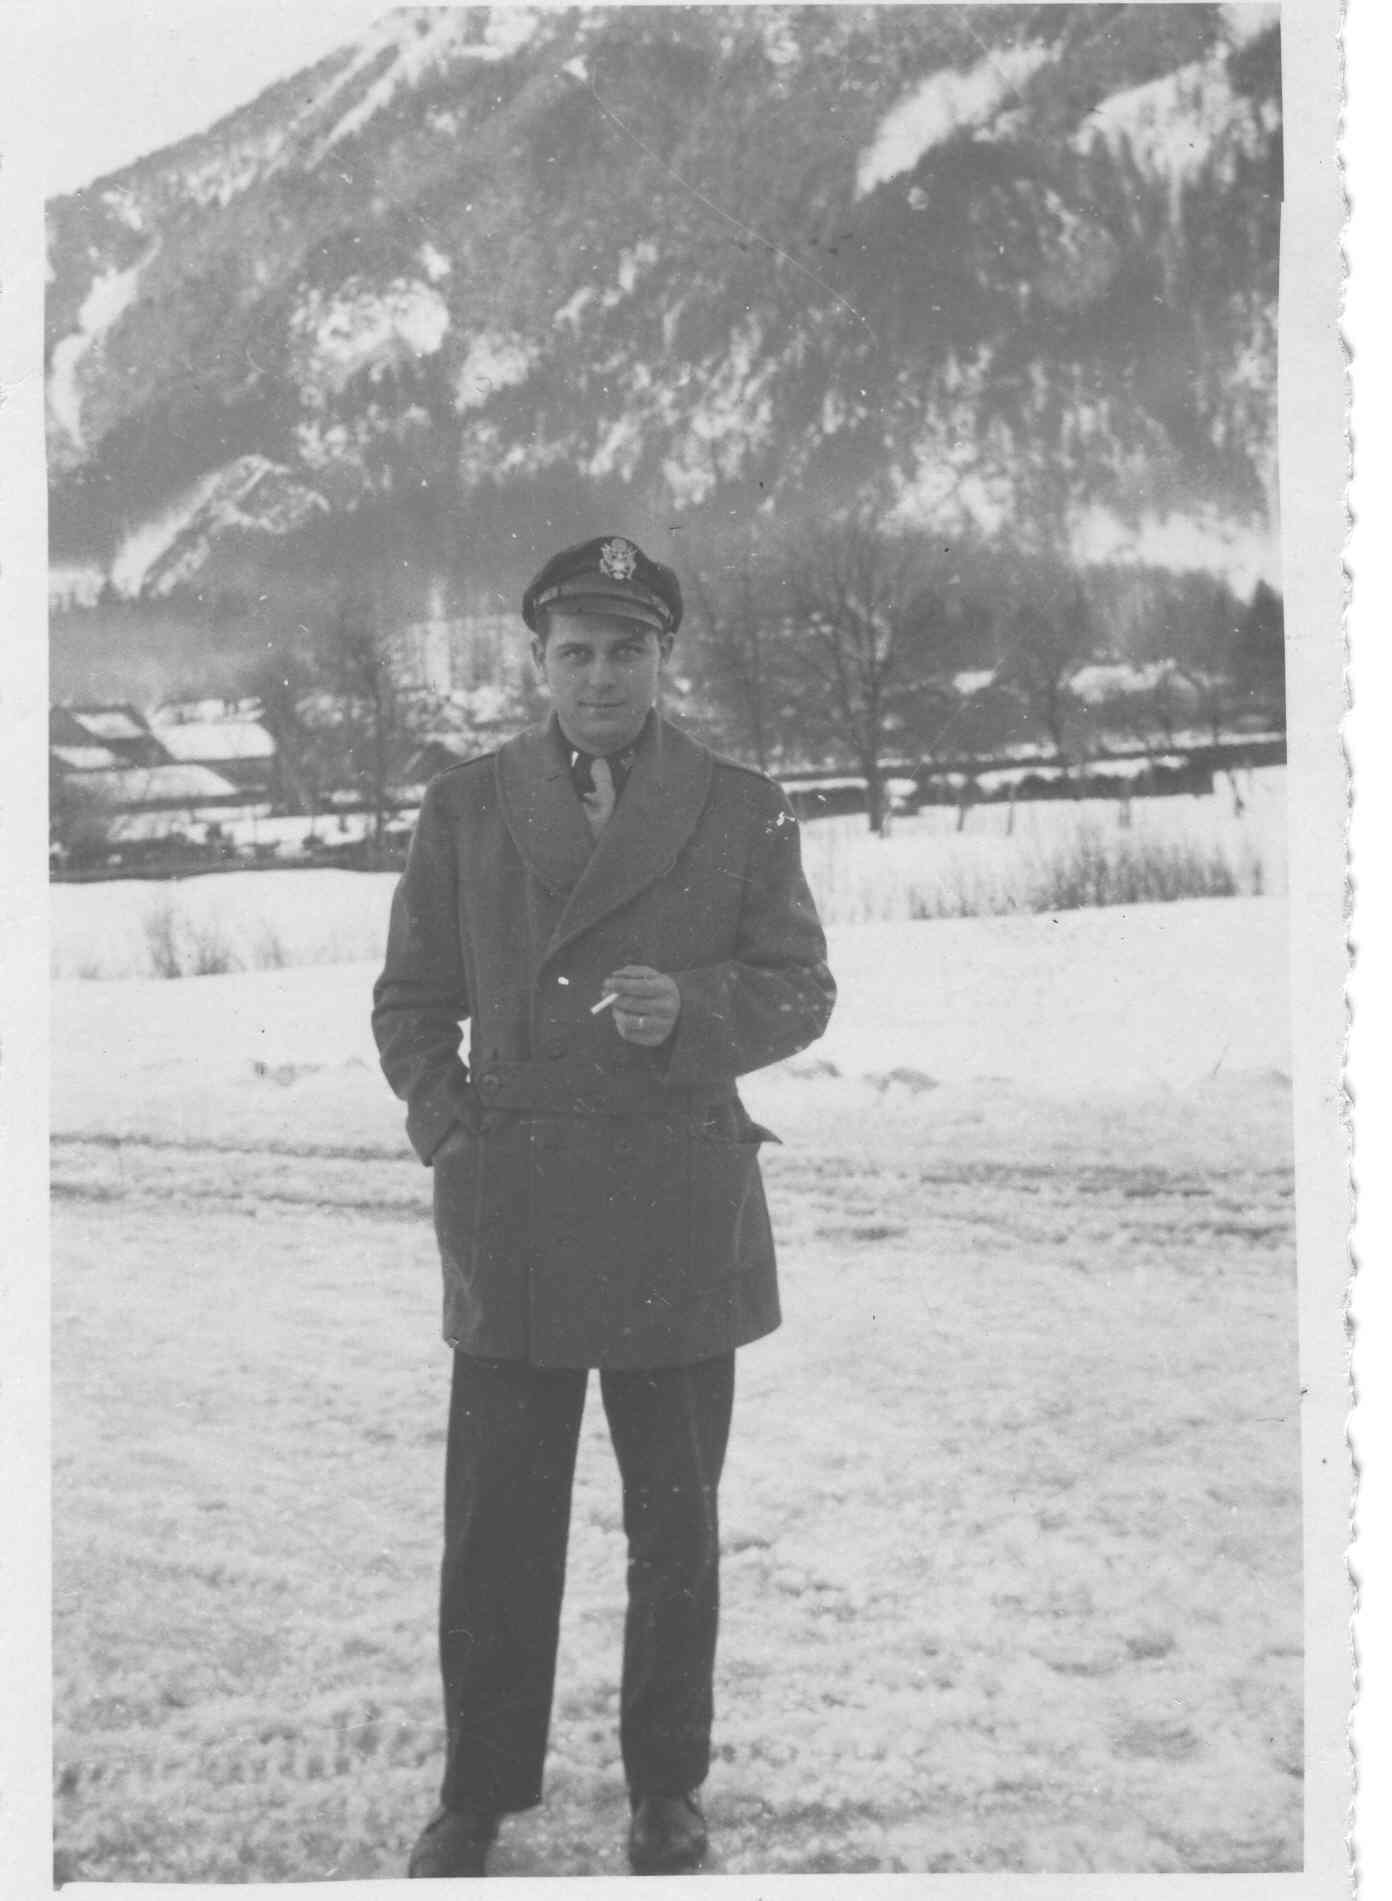 <span style="font-size:18px; "> &nbsp;1947 Germany, near the border - my father was a member of one of the first groups to do tours for the USMLM. &nbsp;They transferred him from Pacific Theater to European Theater after the war when they realized he spoke Russian fluently. &nbsp;This was his first Intelligence posting, where he served as pilot and lead navigator during the war. Photo provided by Anne-Marie Fitzurka Cooper</span>